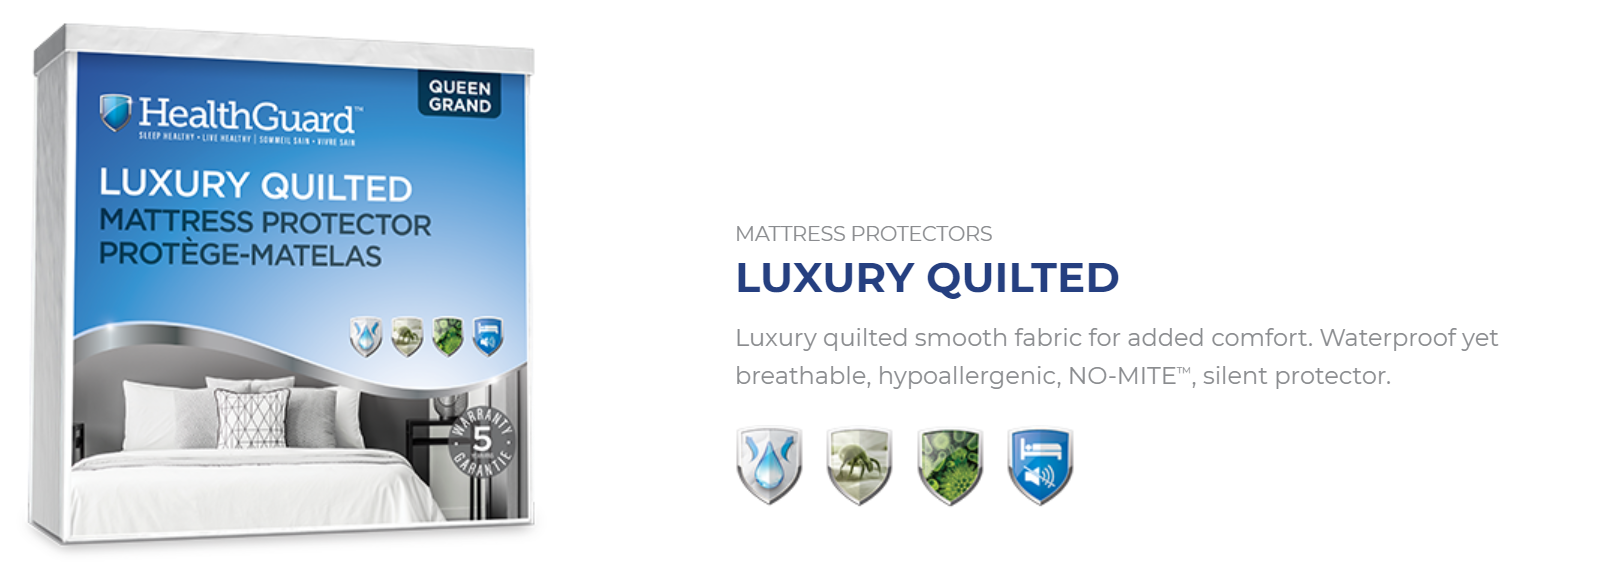 Healthguard Luxury Quilted Mattress Protector Banner